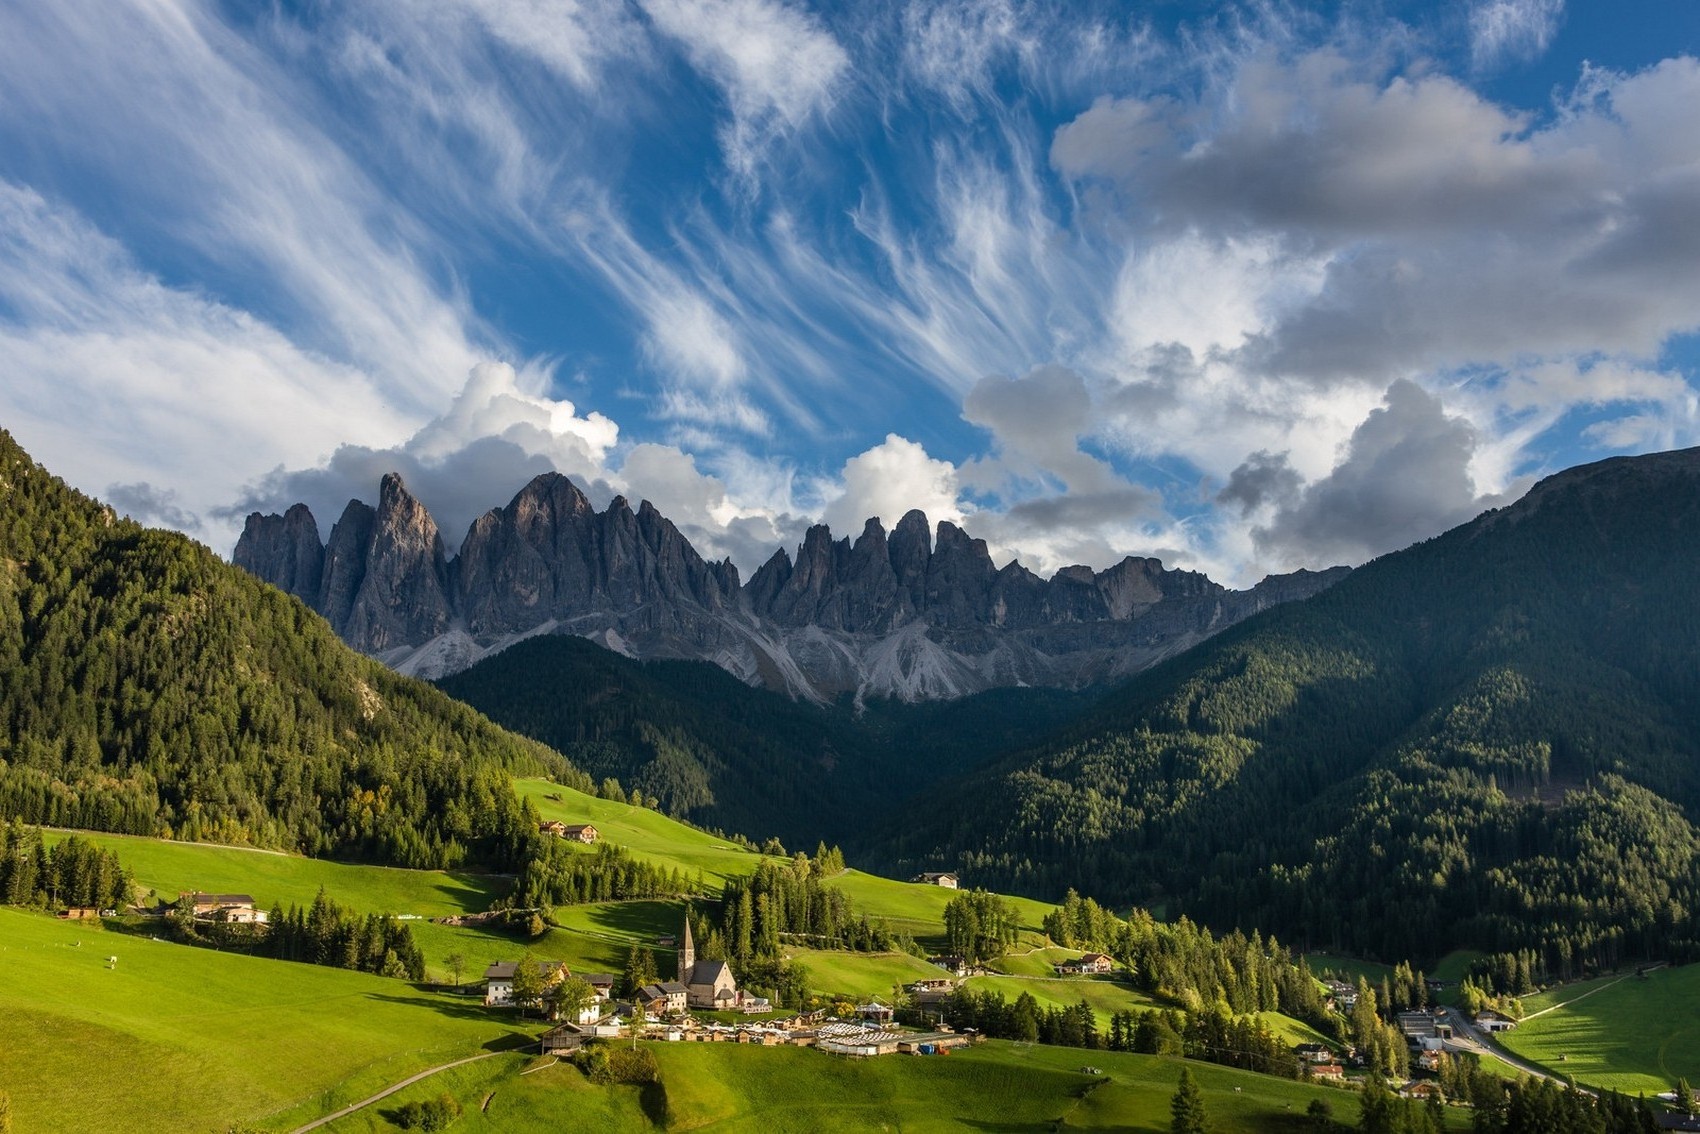 nature, Landscape, Mountain, Summer, Morning, Village, Church, Forest, Grass, Dolomites (mountains), Clouds, Sunlight, Alps, Italy Wallpaper